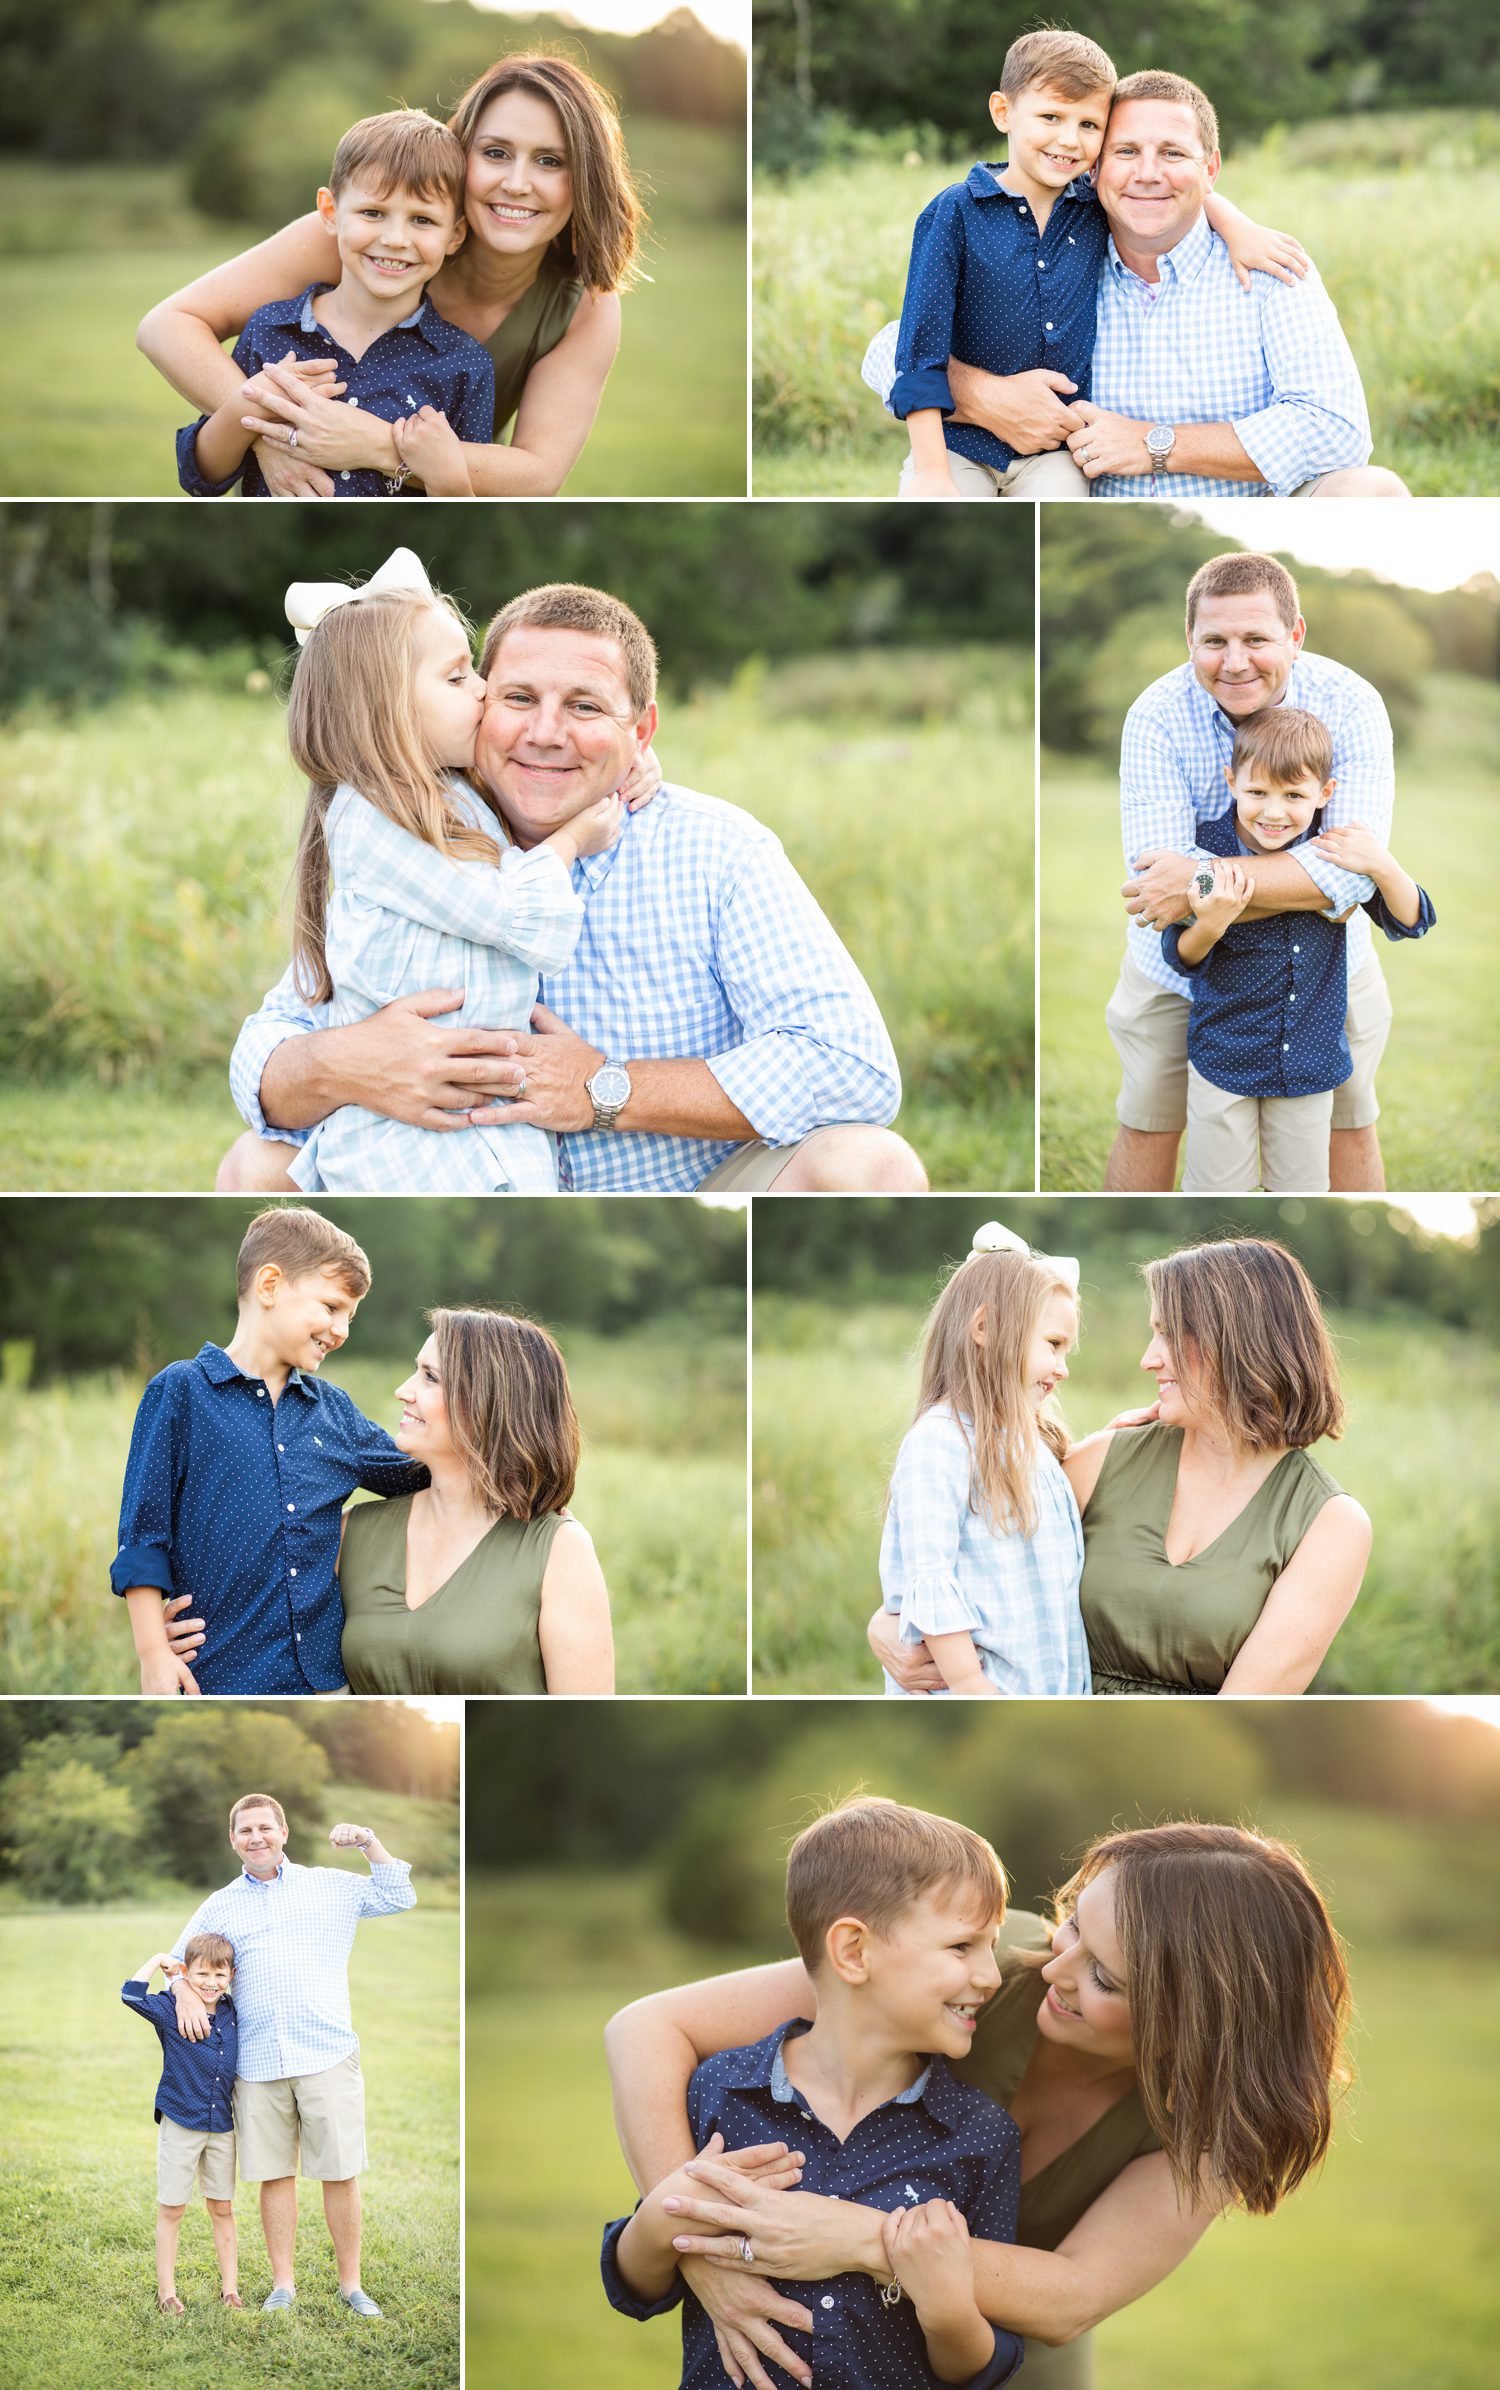 Family portrait photography mini session at Ravenswood Mansion, Brentwood, TN